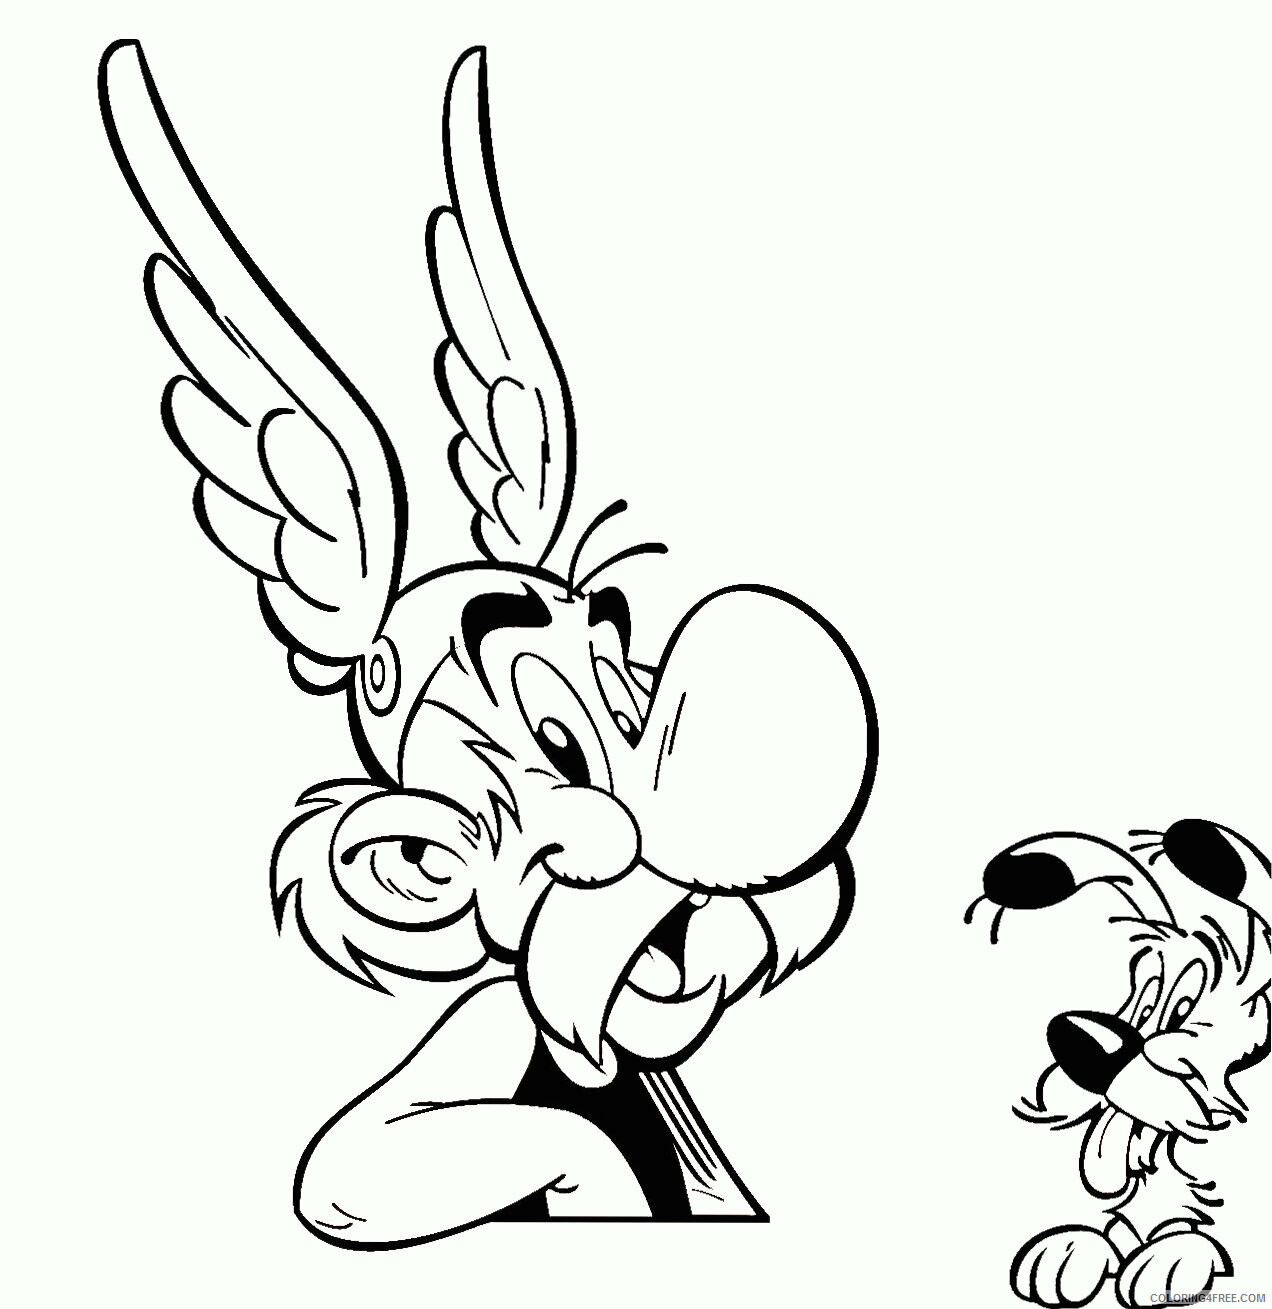 Asterix Coloring Pages Printable Sheets Asterix With Dogmatix Page 2021 a 3401 Coloring4free